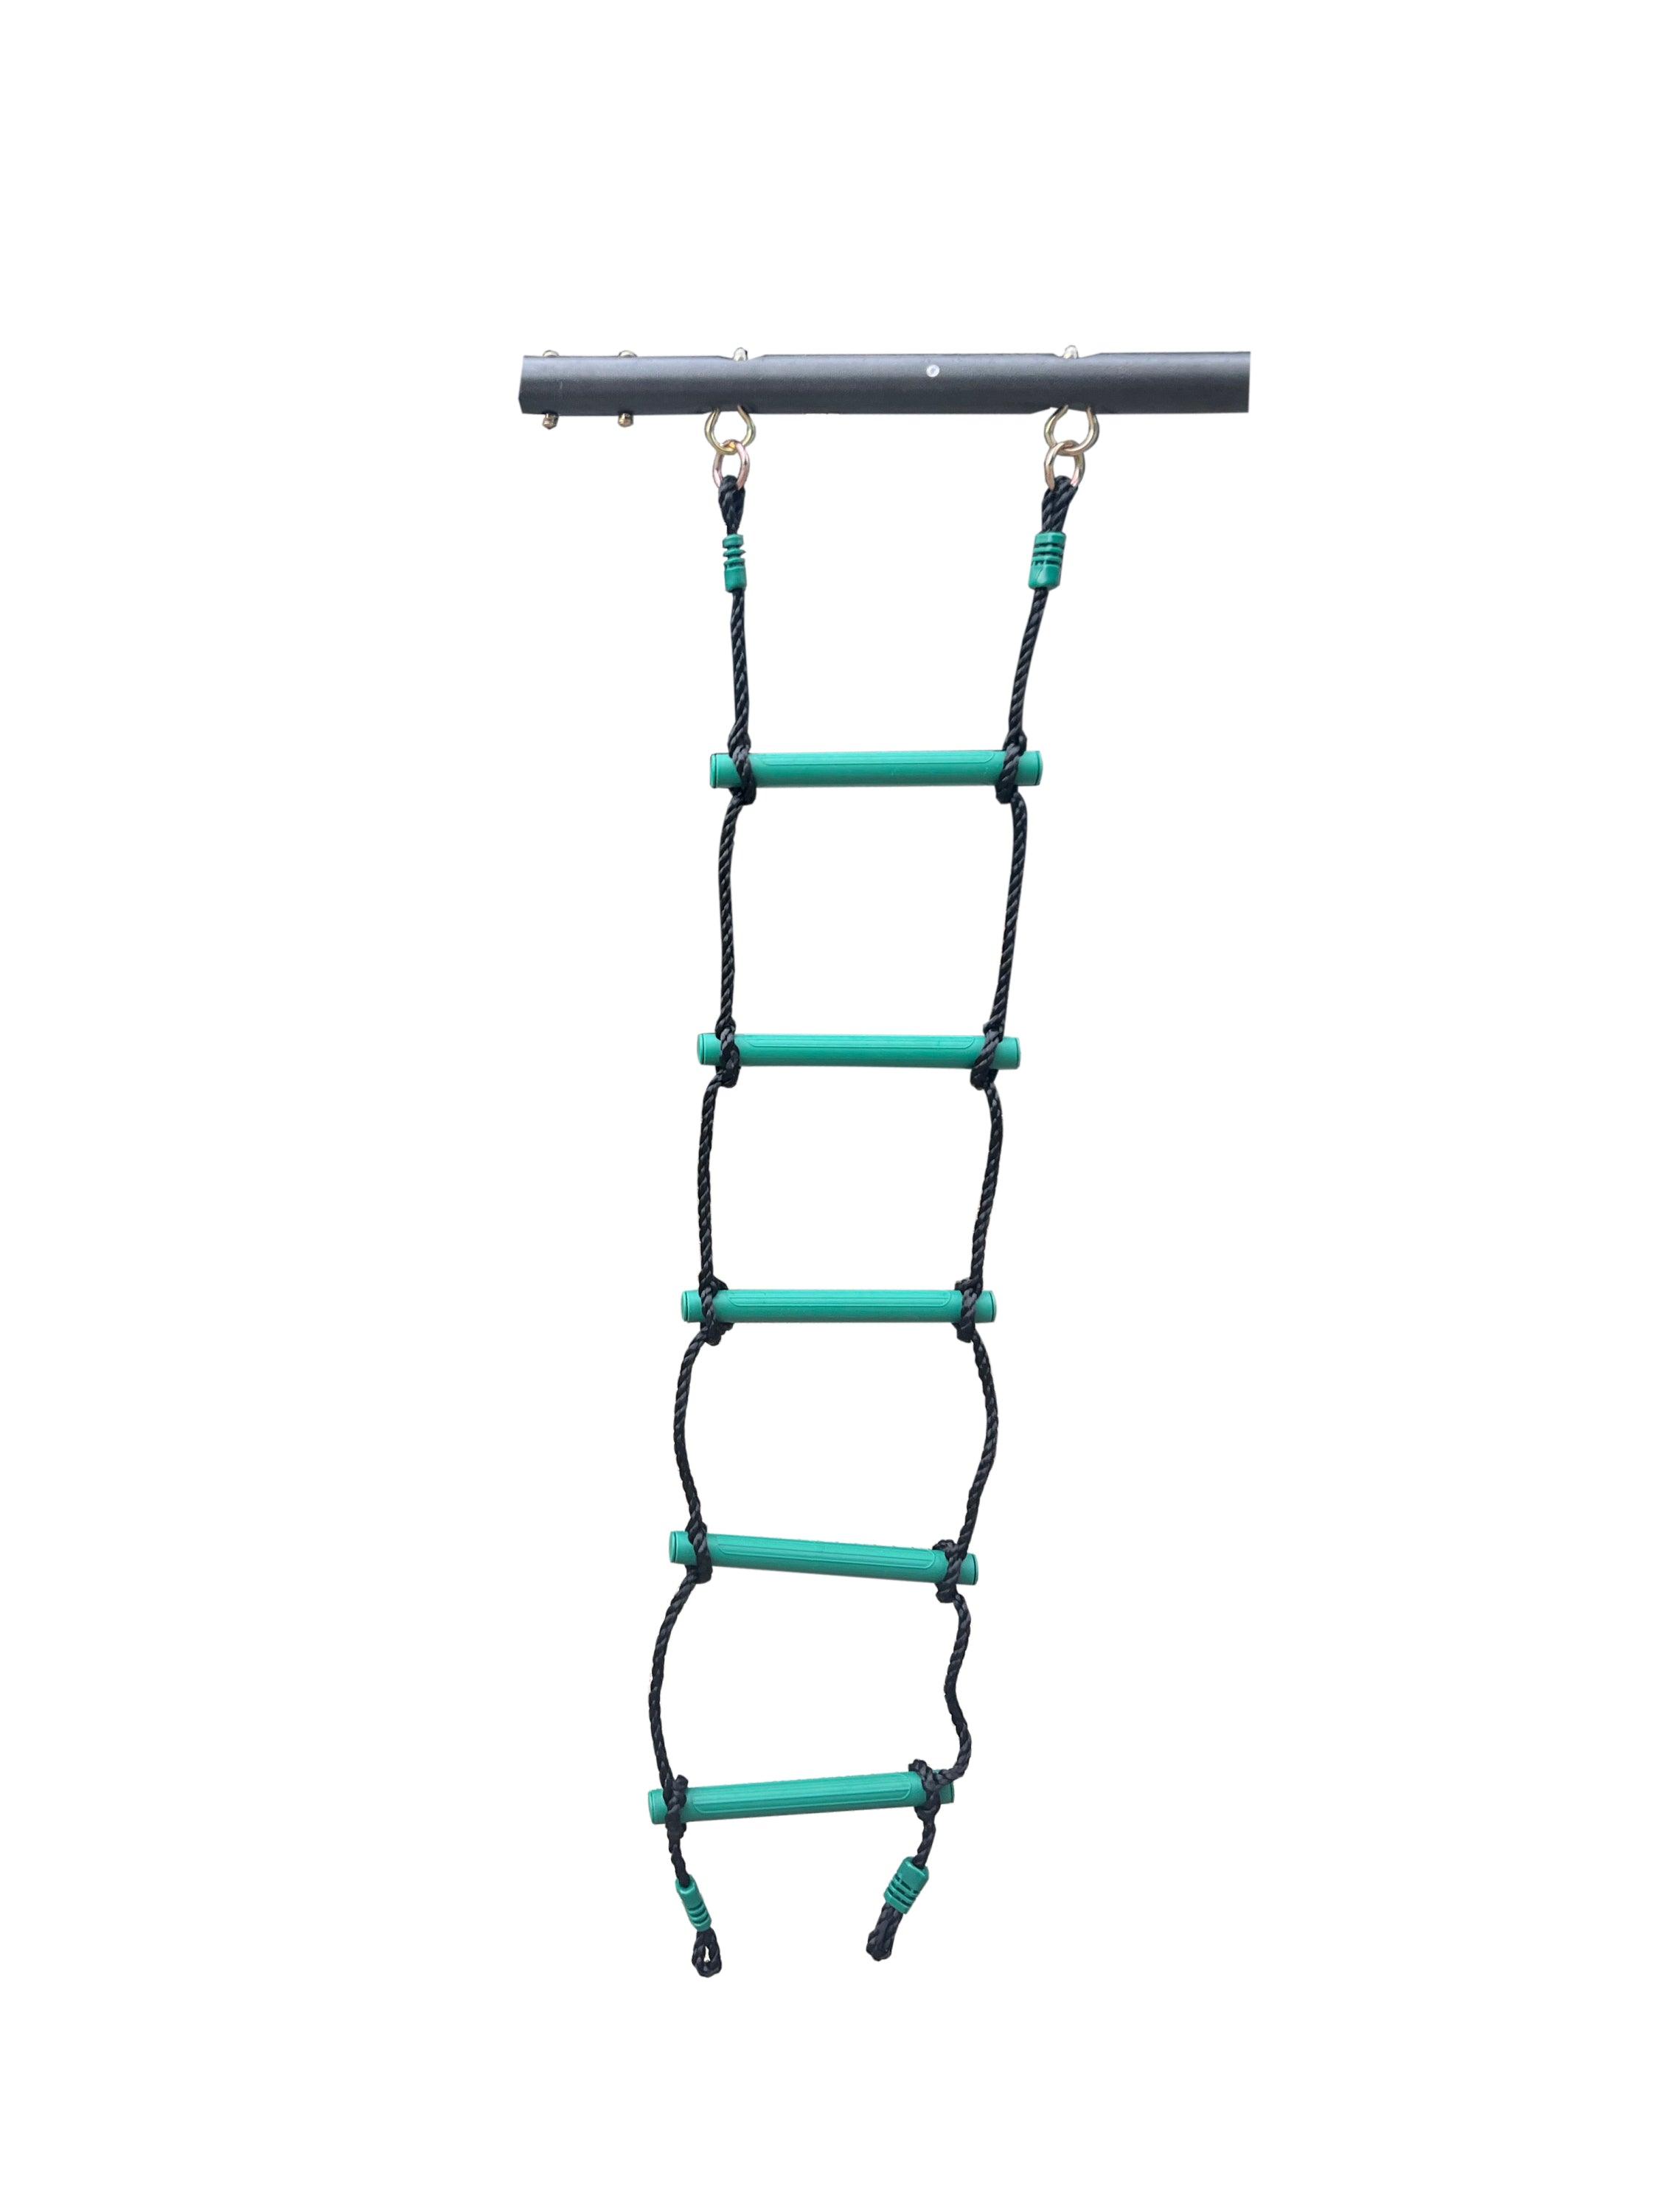 Blackish Green Interesting Four Function Swingset With Face To Face Metal Plastic Safe Swing Seat 550Lbs For Outdoor Playground For Age 3+ LamCham